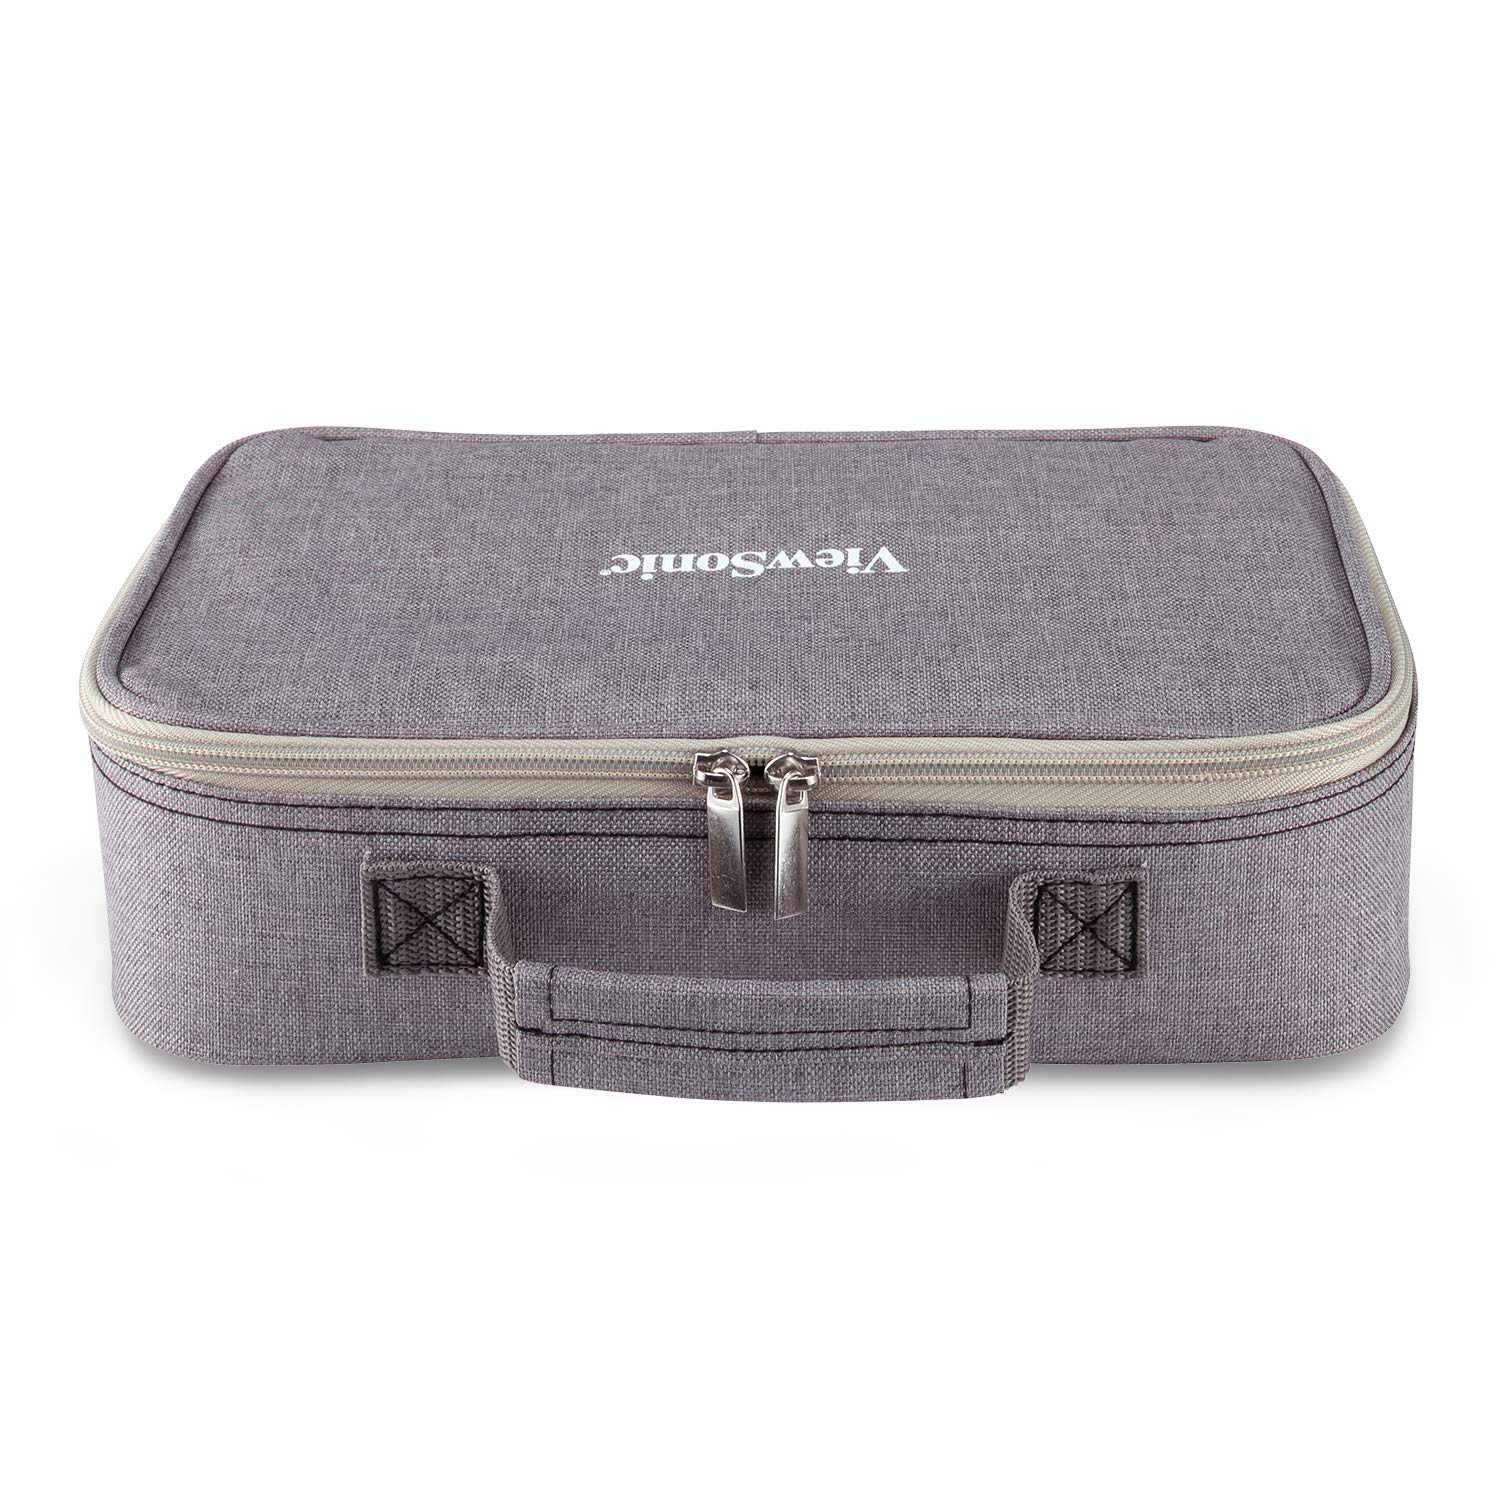 ViewSonic PJ-CASE-010 Zipped Soft Padded Carrying Case for M1 Projector Gray